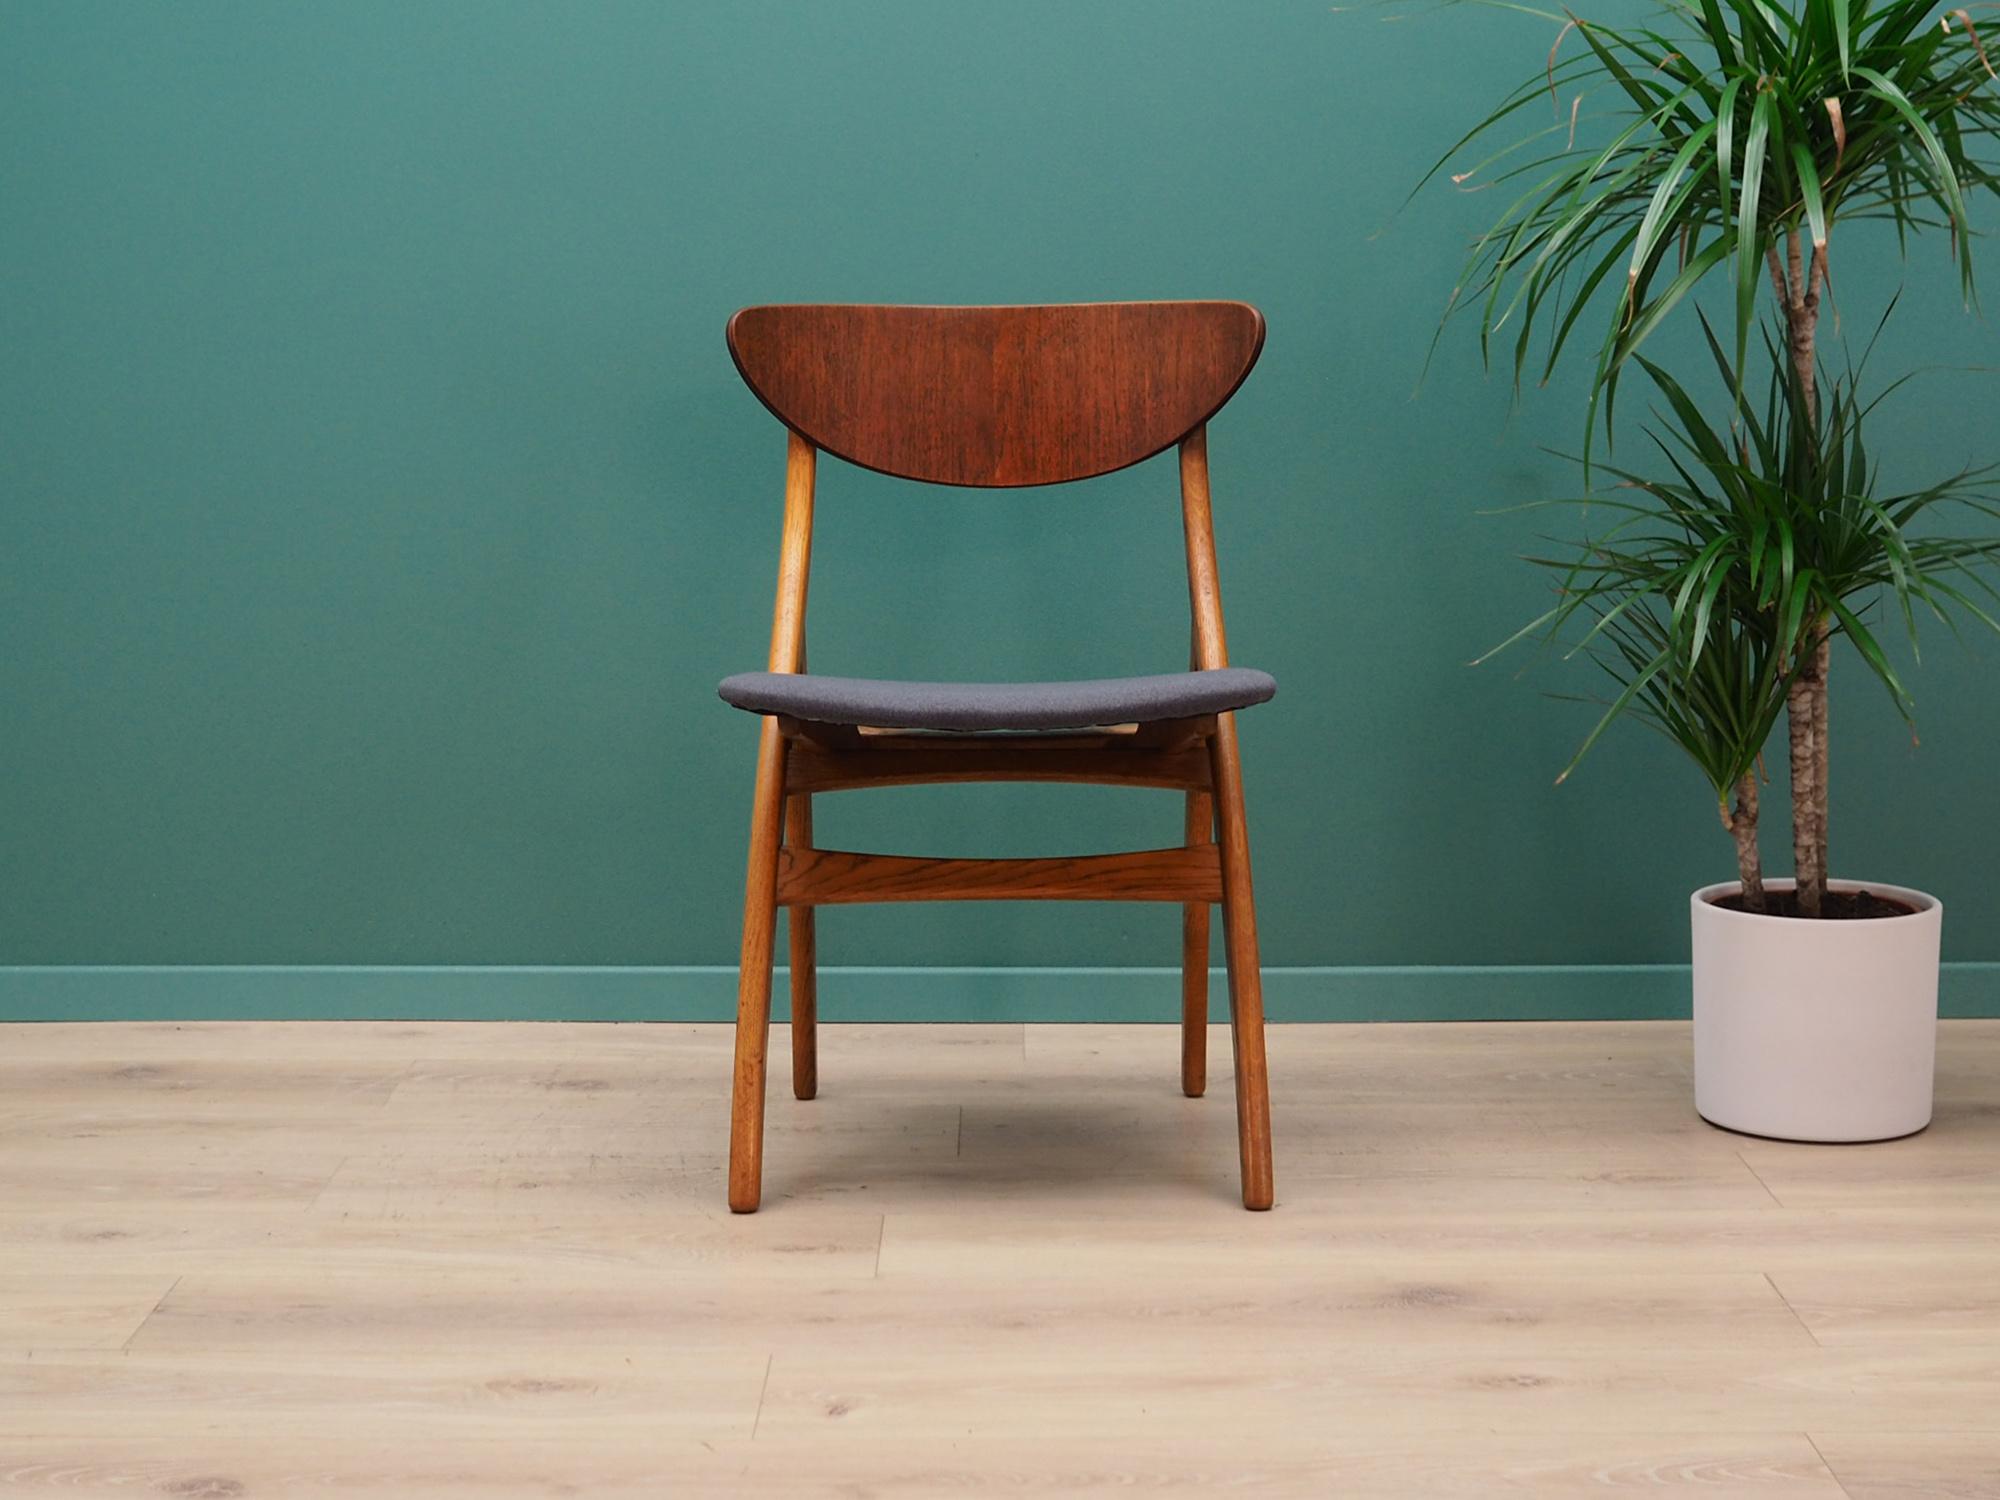 Set of five classic chairs from the 1960s-1970s. Danish design, Minimalist form. Chairs are made of solid oak wood, backrest finished with teak veneer with seat covered with dark blue fabric. Preserved in good condition (minor bruises and scratches,